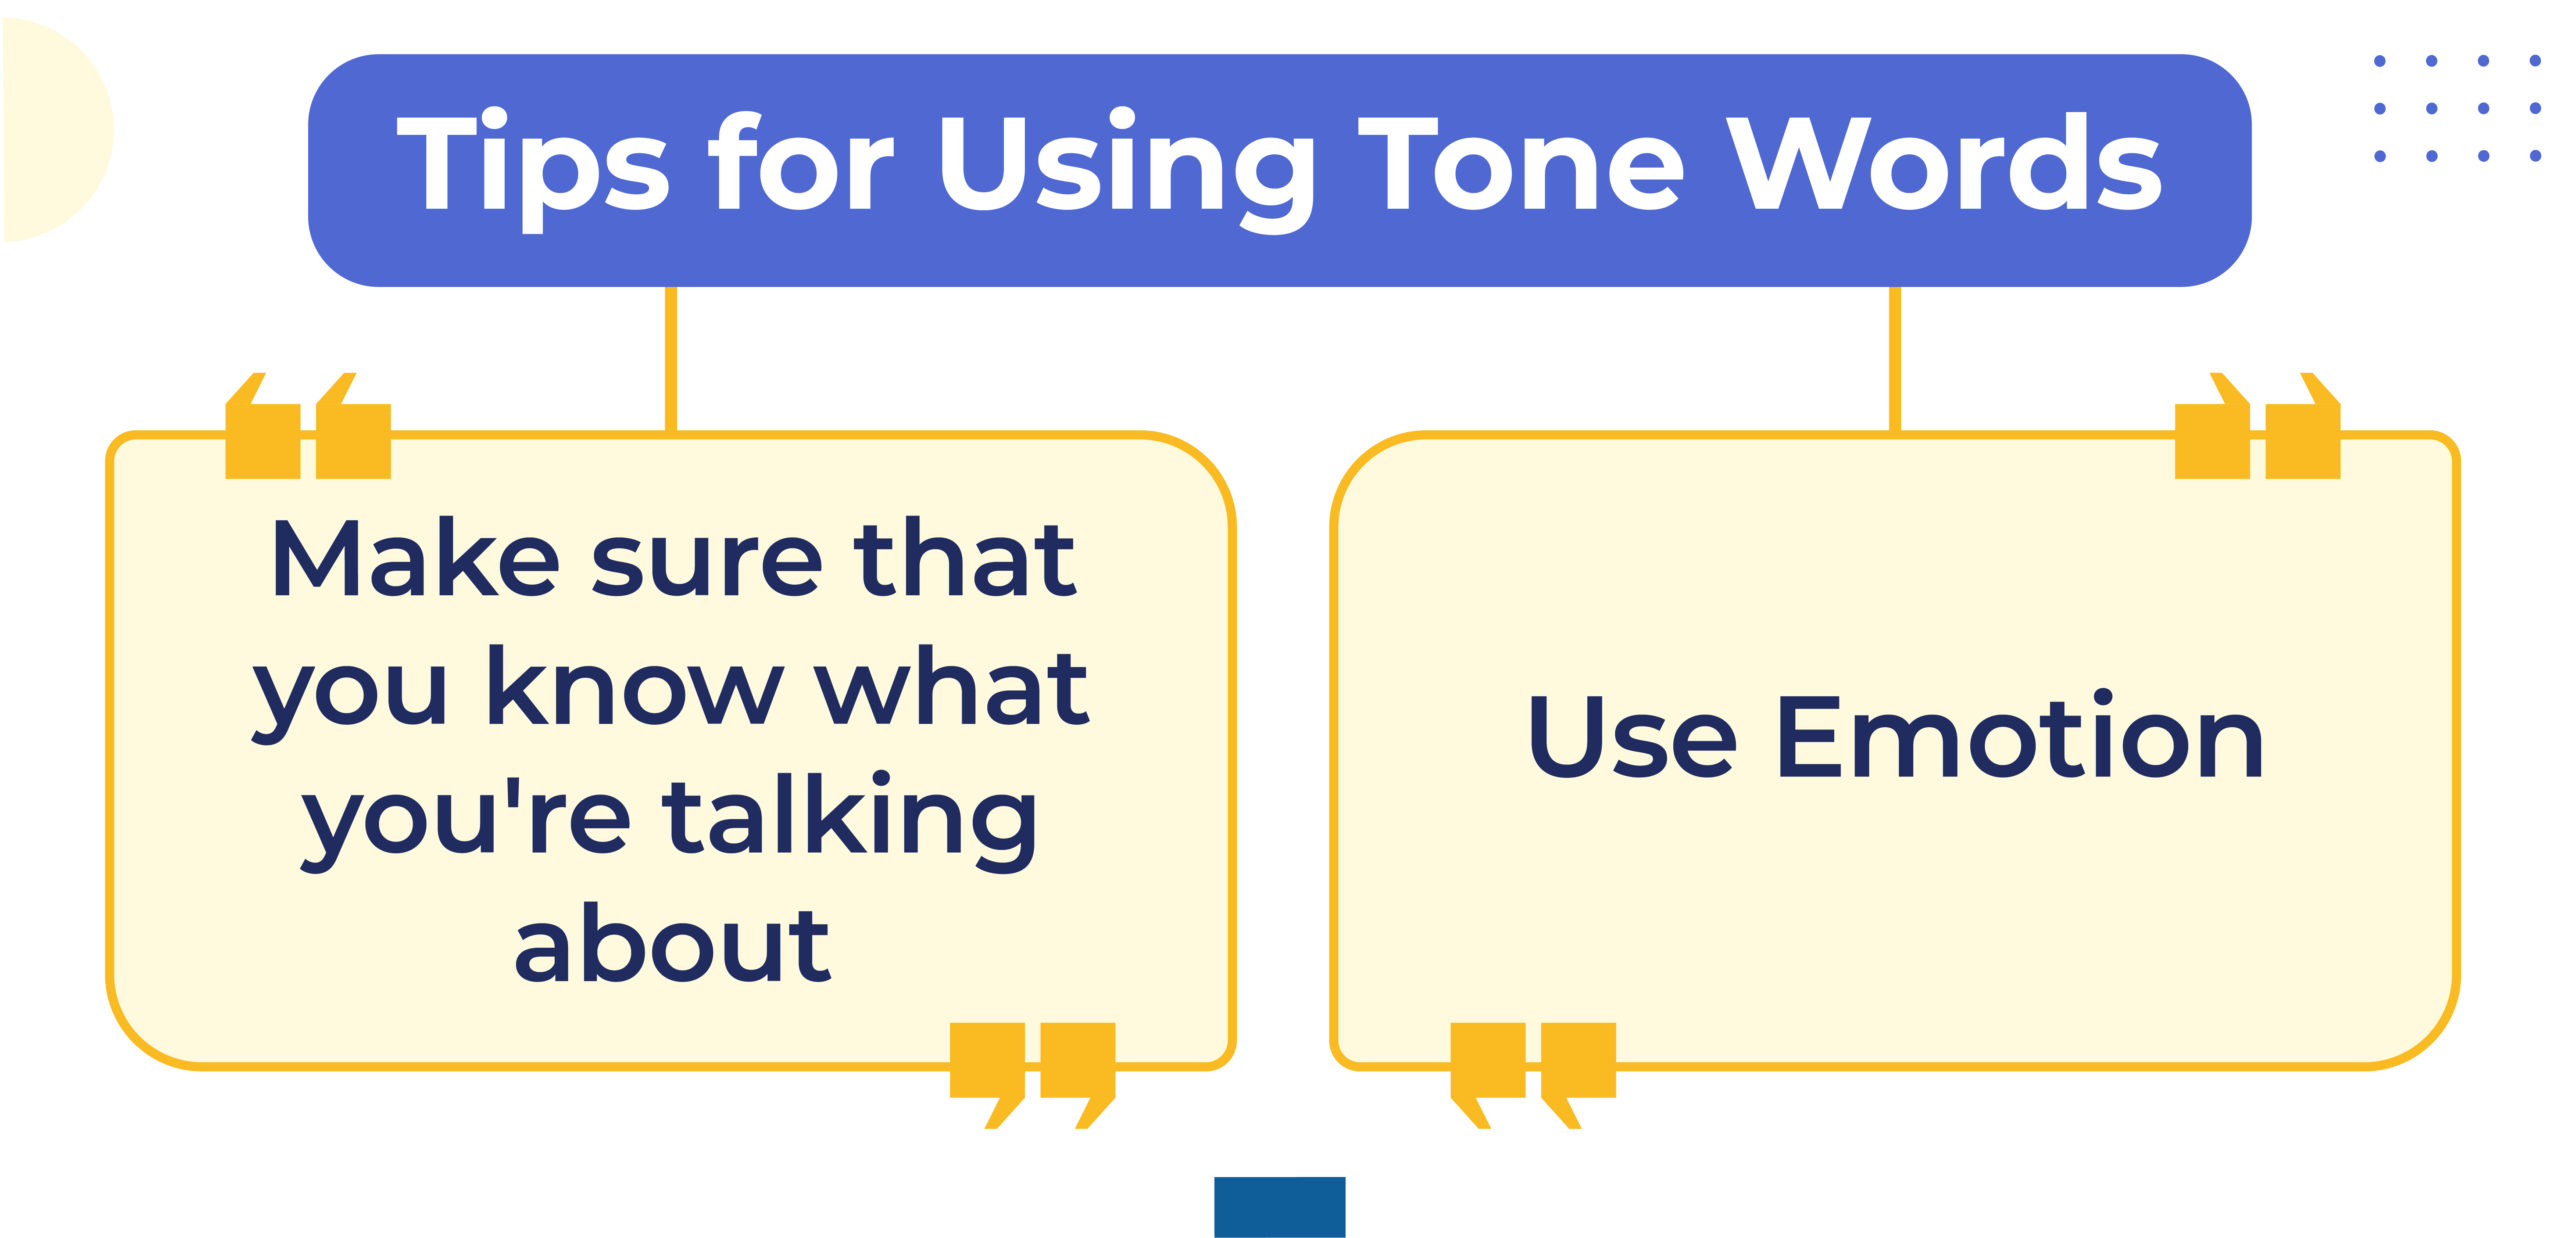 Tips for Using Tone Words